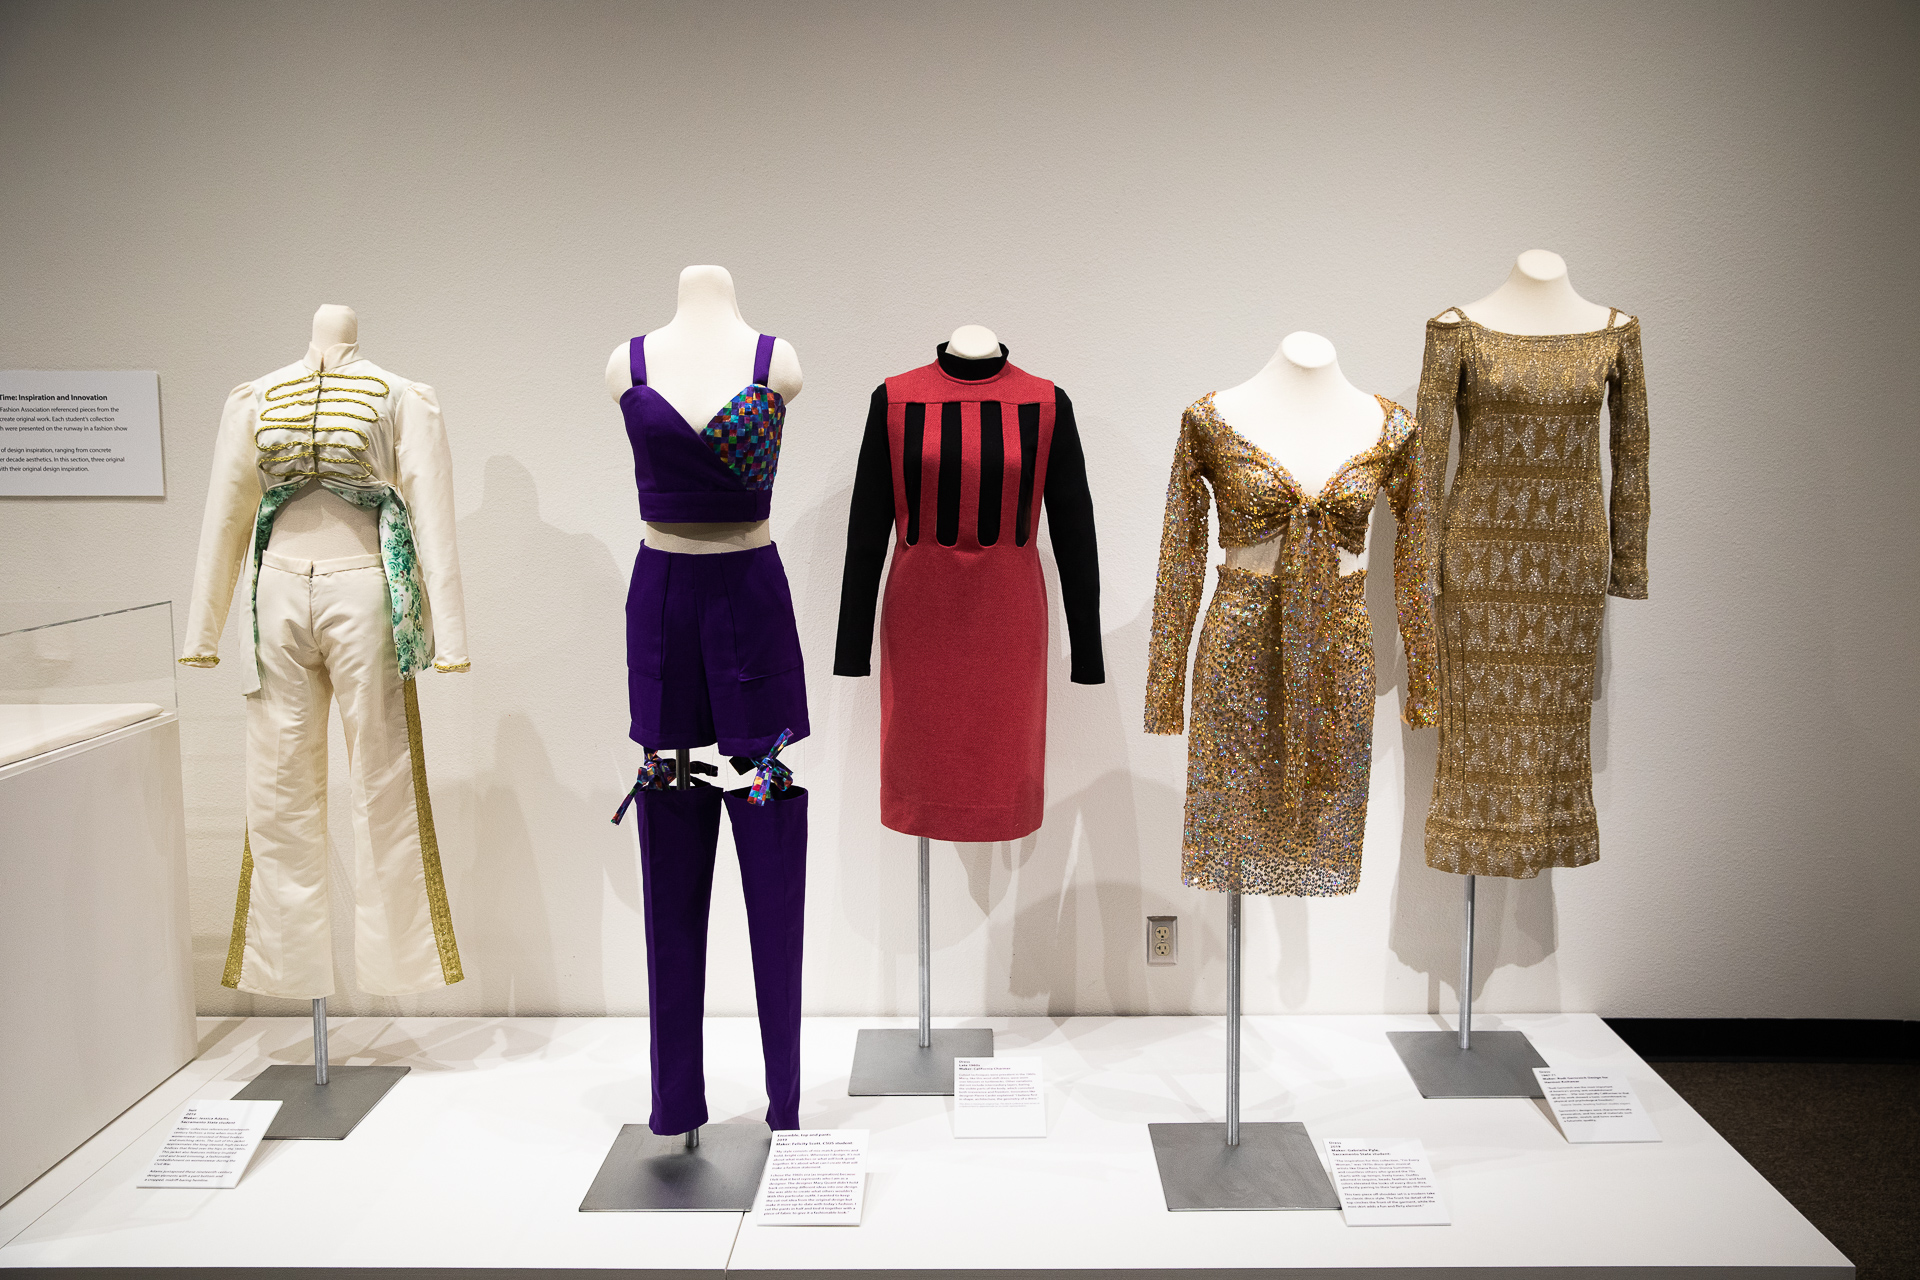 Five of the clothing outfits from eras between the 1860s and 1980s, on display as part of Sacramento State's "Dressing Sacramento: 120 Years of Fashion" exhibit in the University Library Gallery.